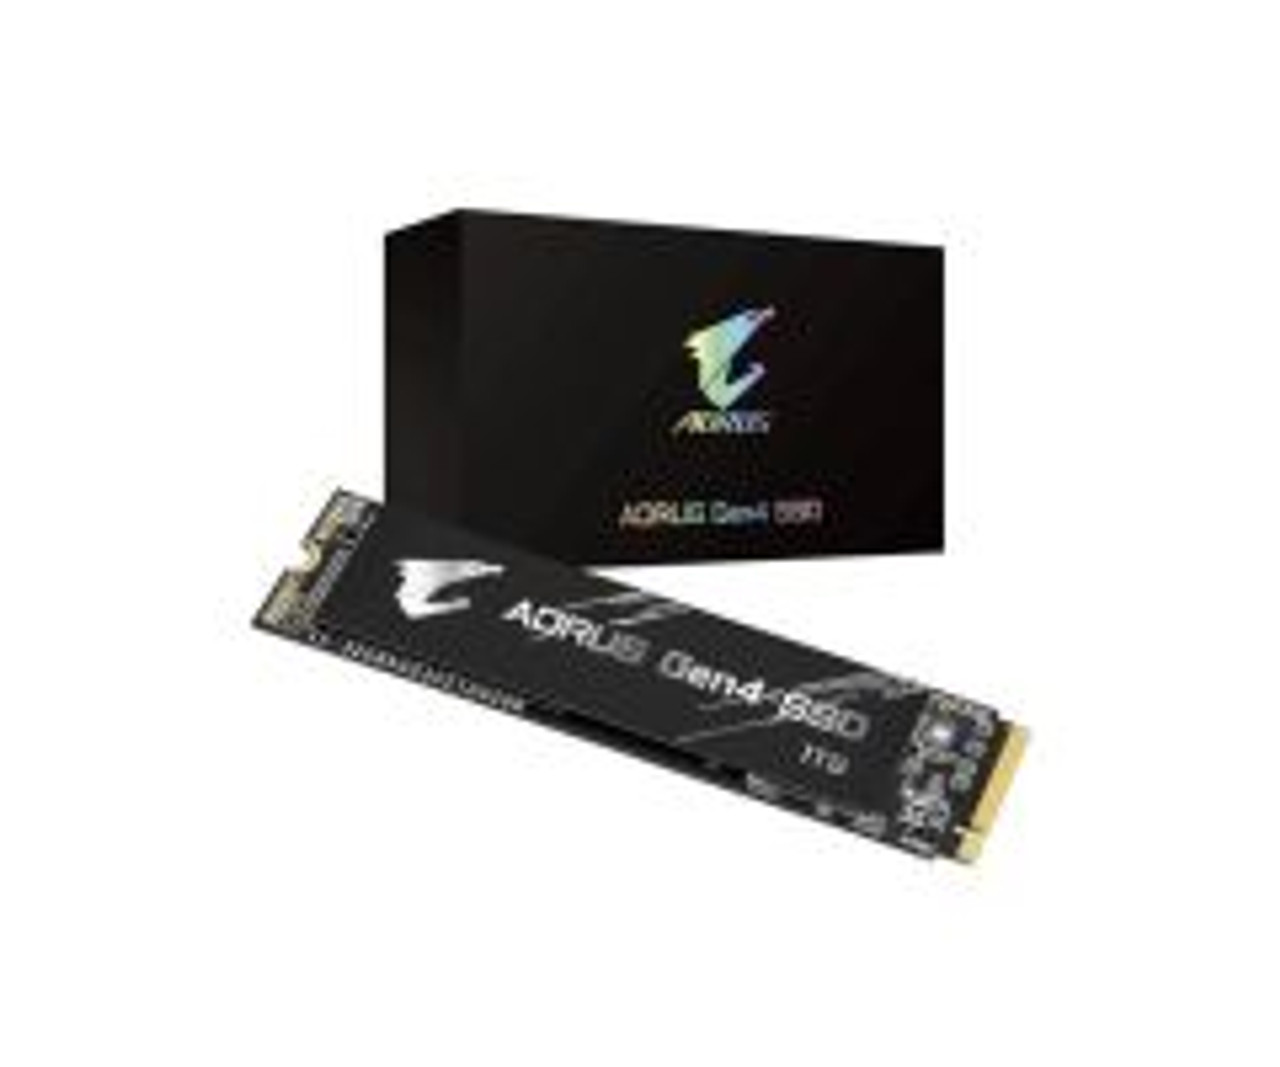 GP-AG41TB | GIGABYTE | TECHNOLOGY AORUS GEN4 1TB TRIPLE-LEVEL CELL PCI EXPRESS 4.0 X4 M.2 2280 SOLID STATE DRIVE